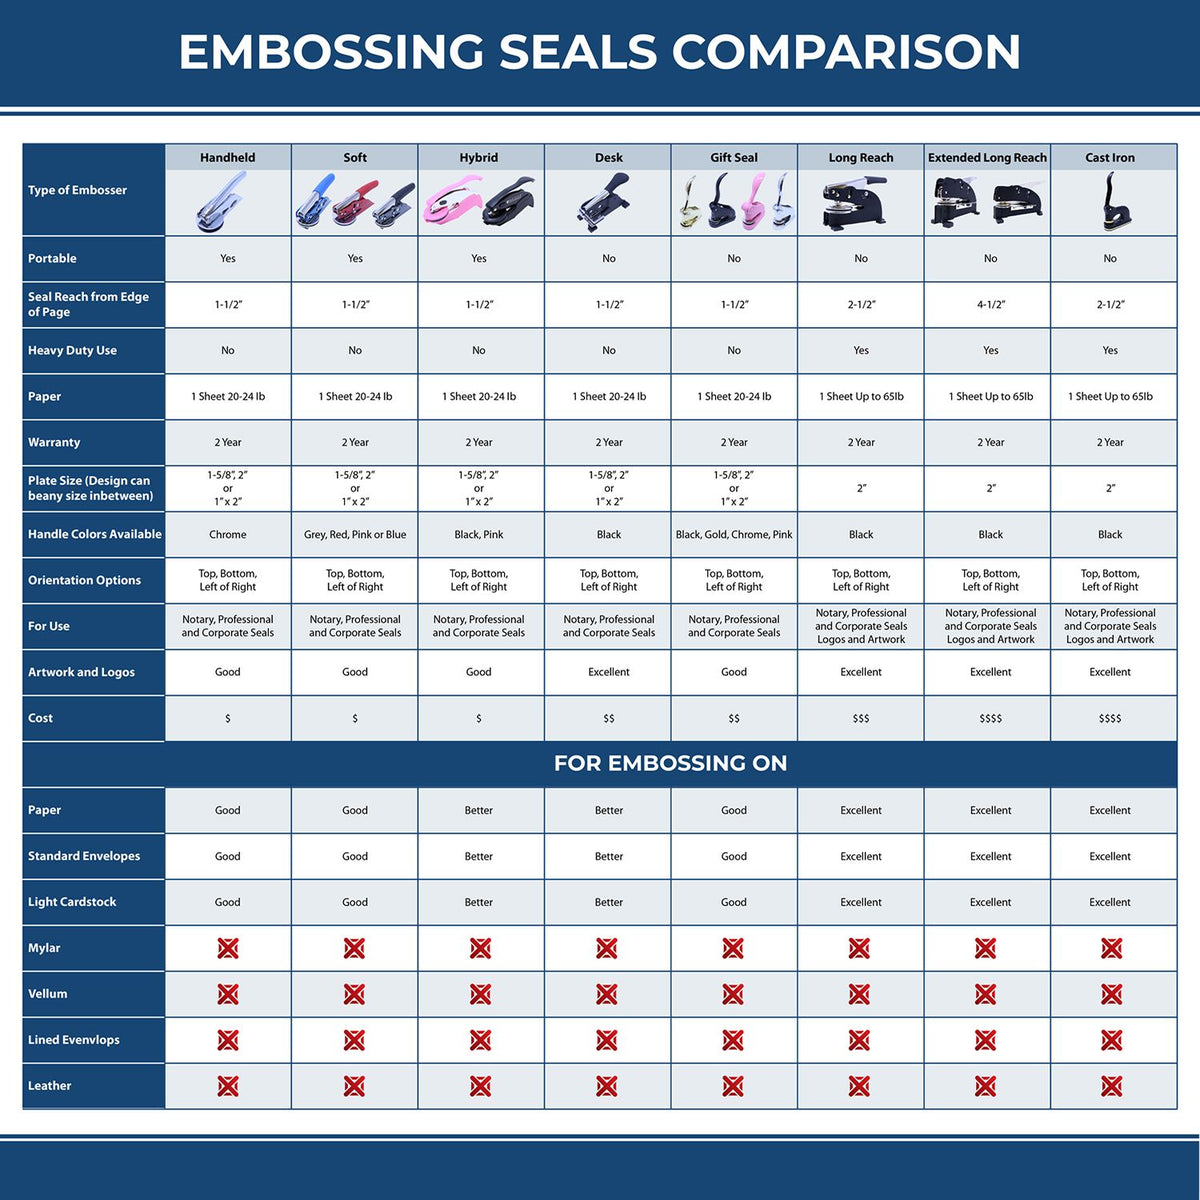 A comparison chart for the different types of mount models available for the Heavy Duty Cast Iron Missouri Architect Embosser.